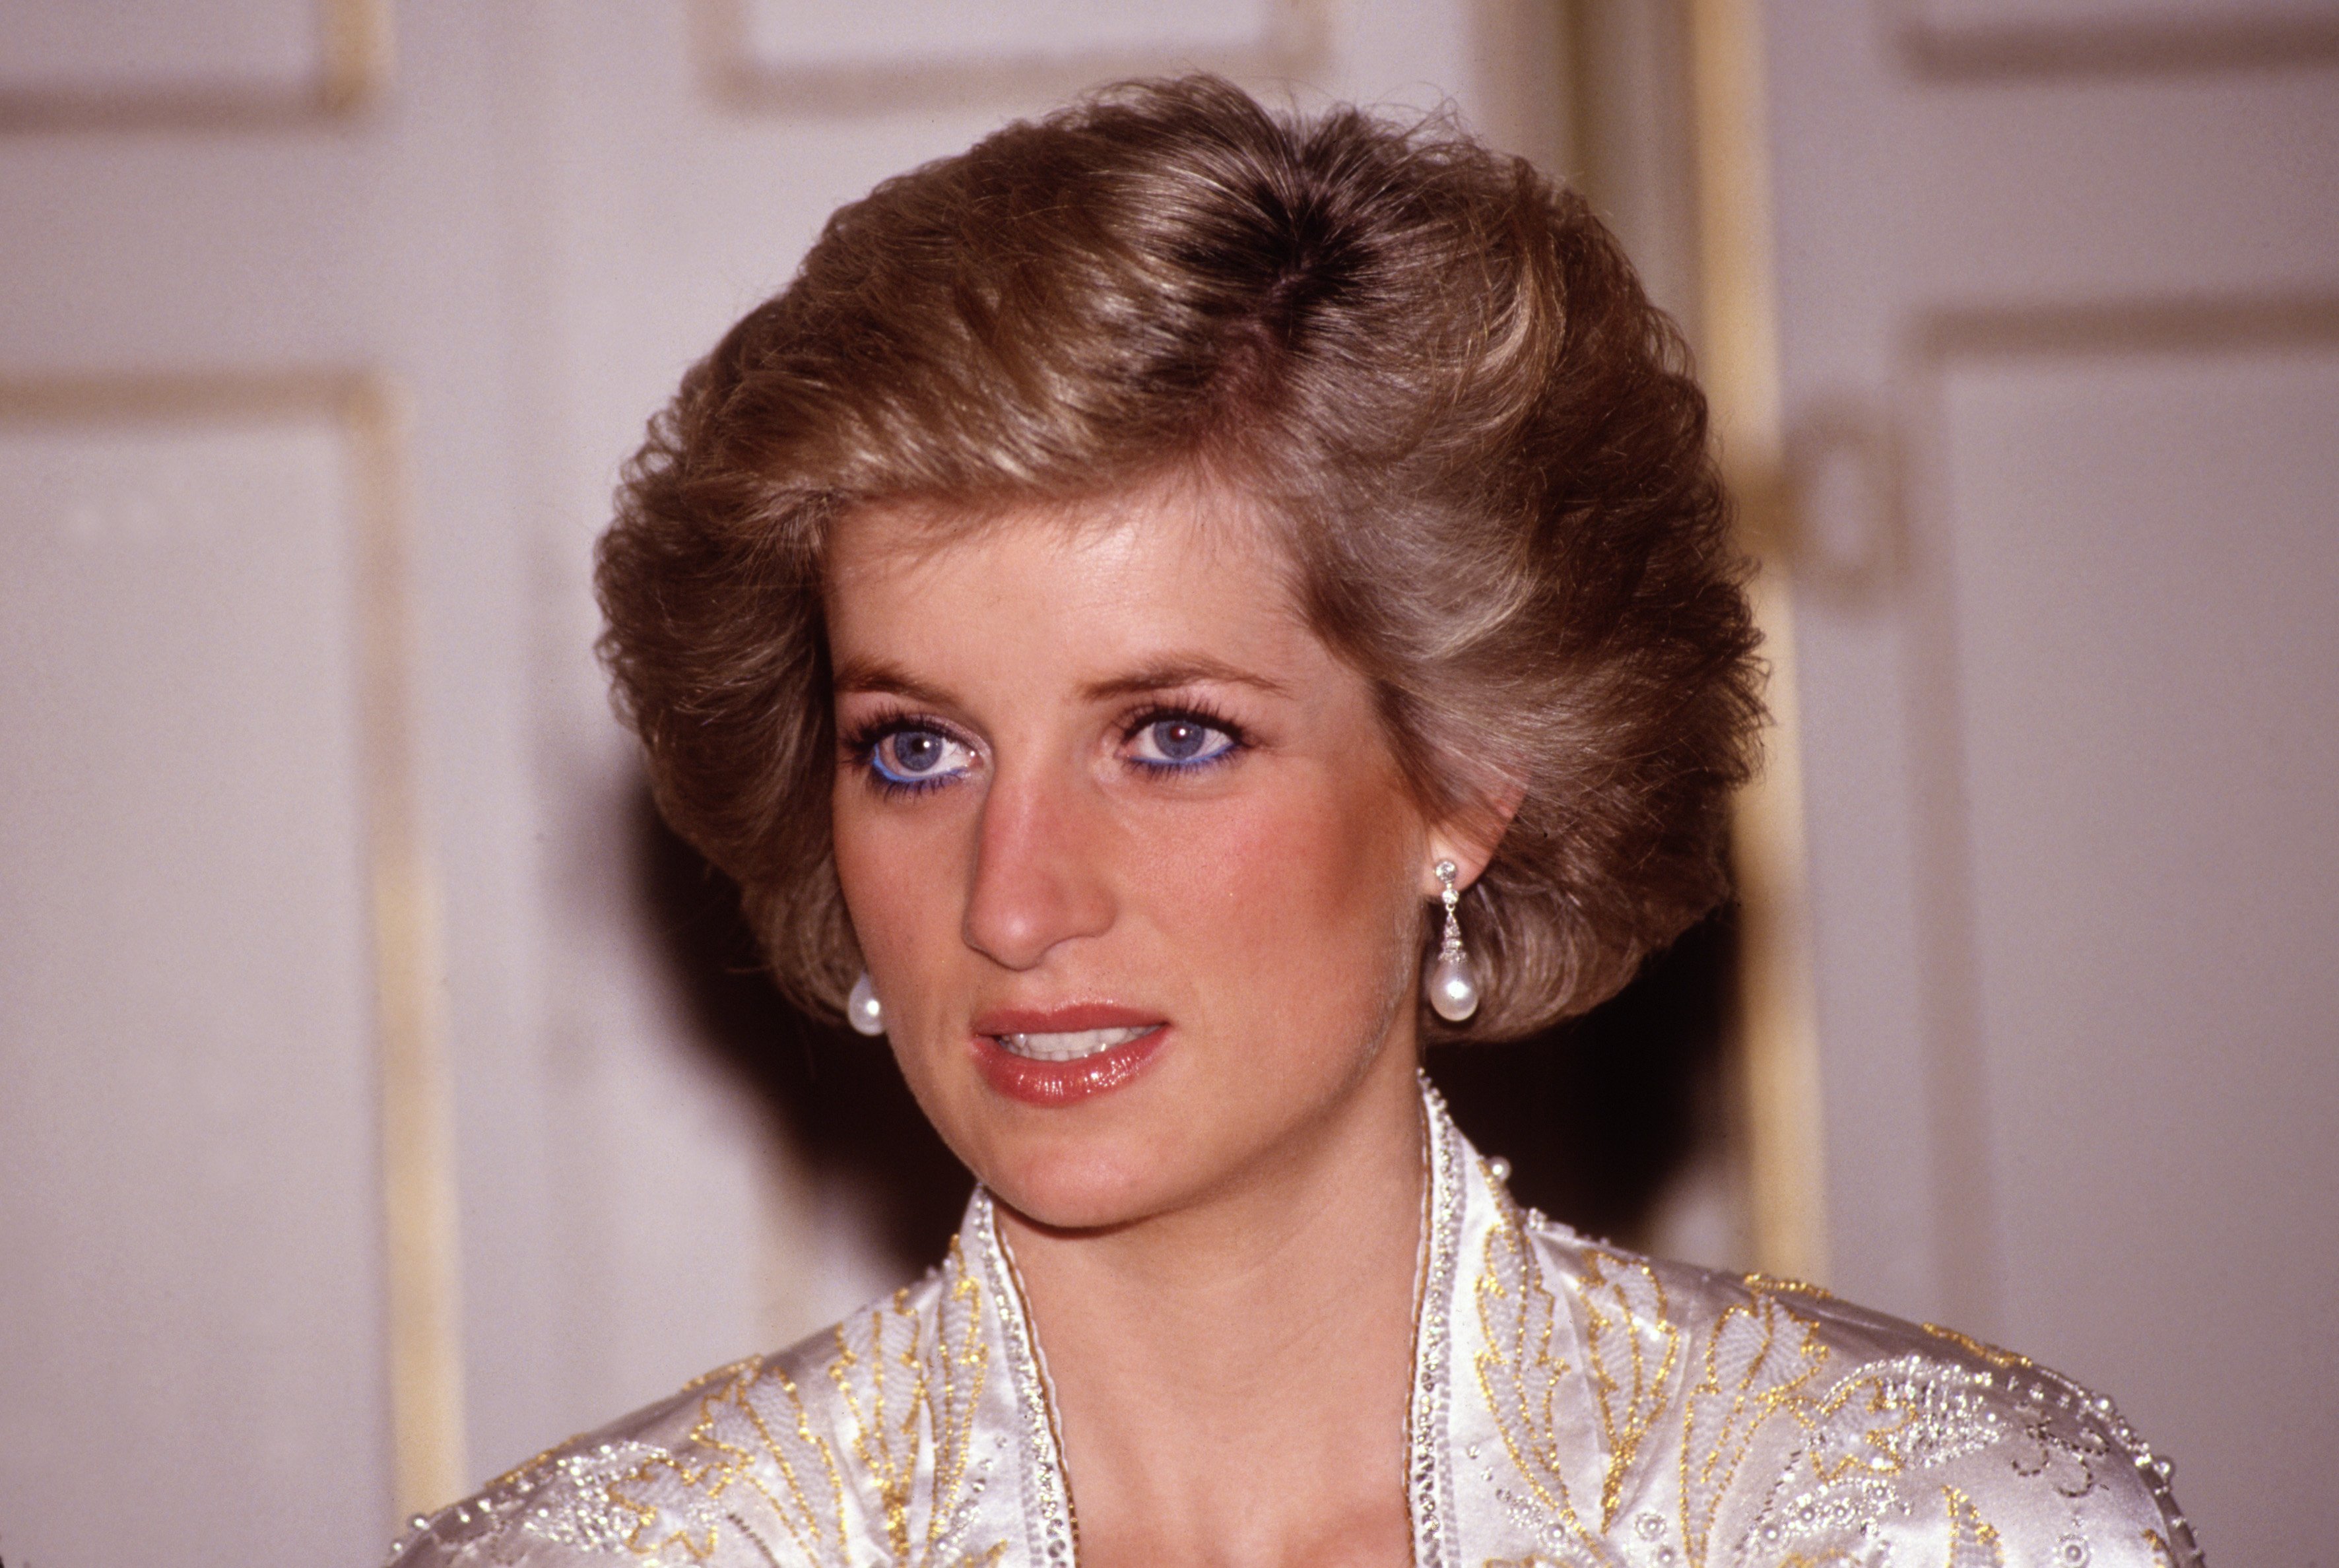 Diana Princess of Wales at a dinner given by President Mitterand in November, 1988 at the Elysee Palace in Paris, France during the Royal Tour of France. | Source: Getty Images